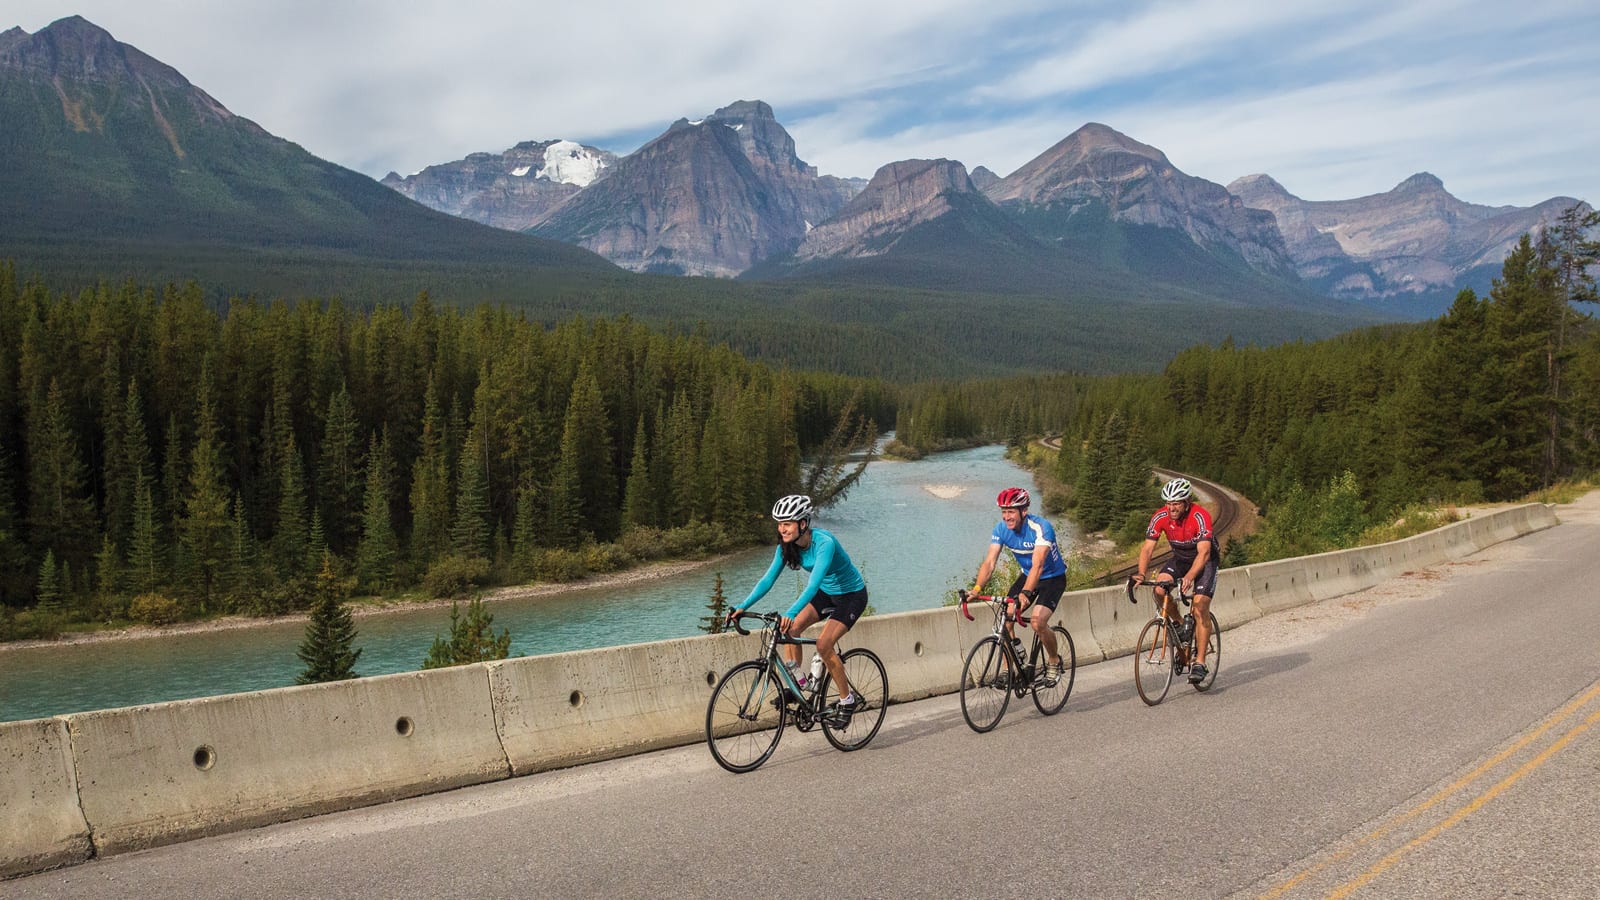 Alberta Rocky Mountains Bow Valley Cyclists